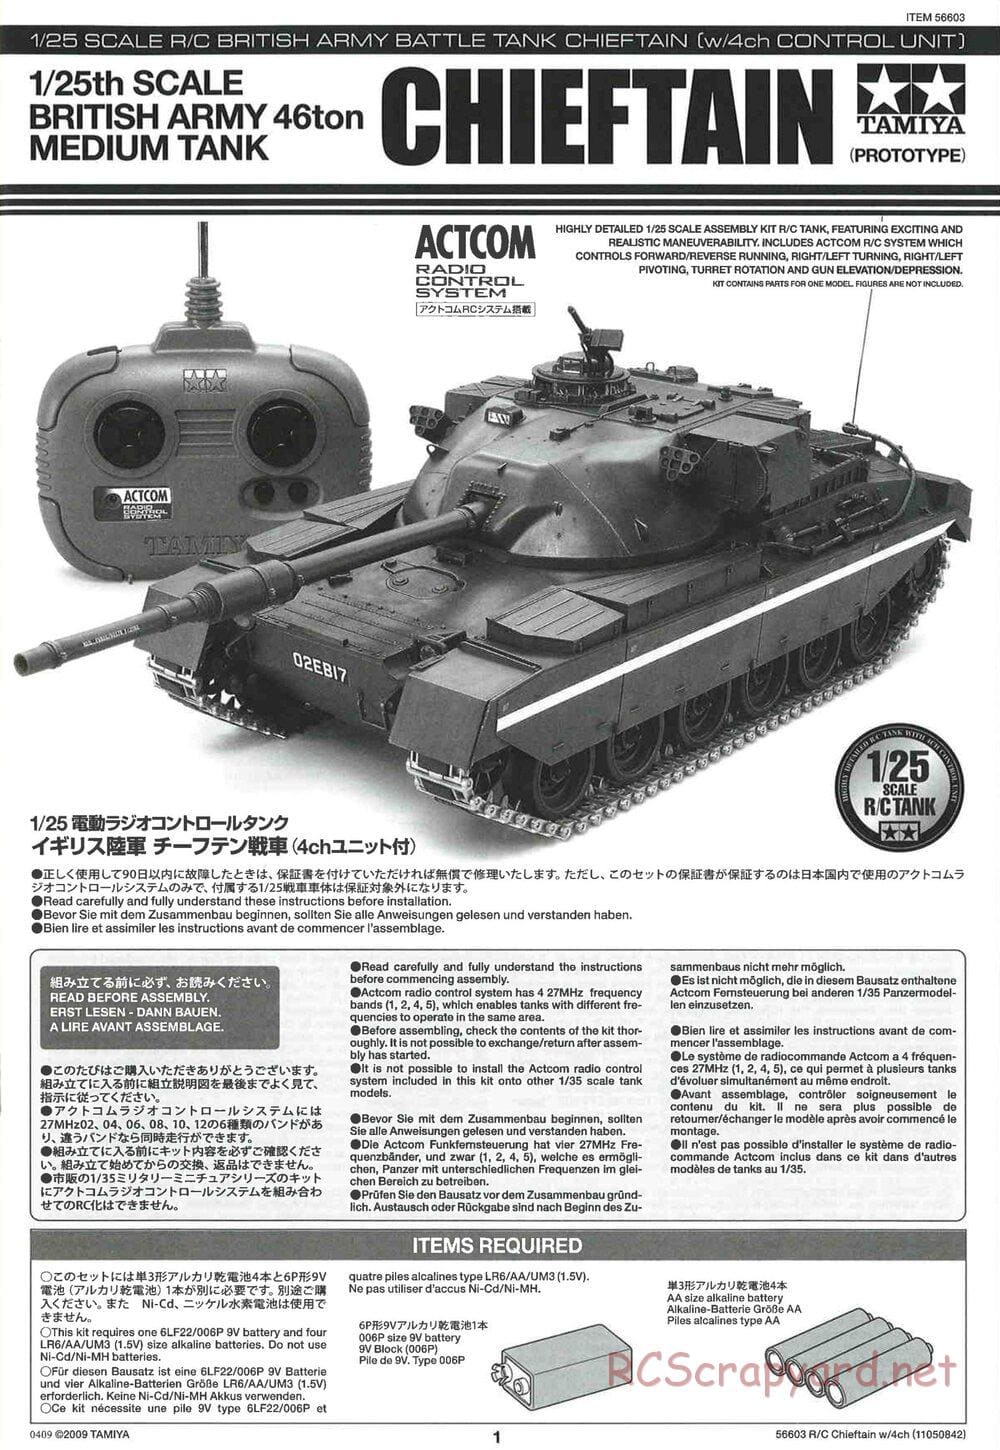 Tamiya - British Army Battle Tank Cheiftain - 1/25 Scale Chassis - Manual - Page 1